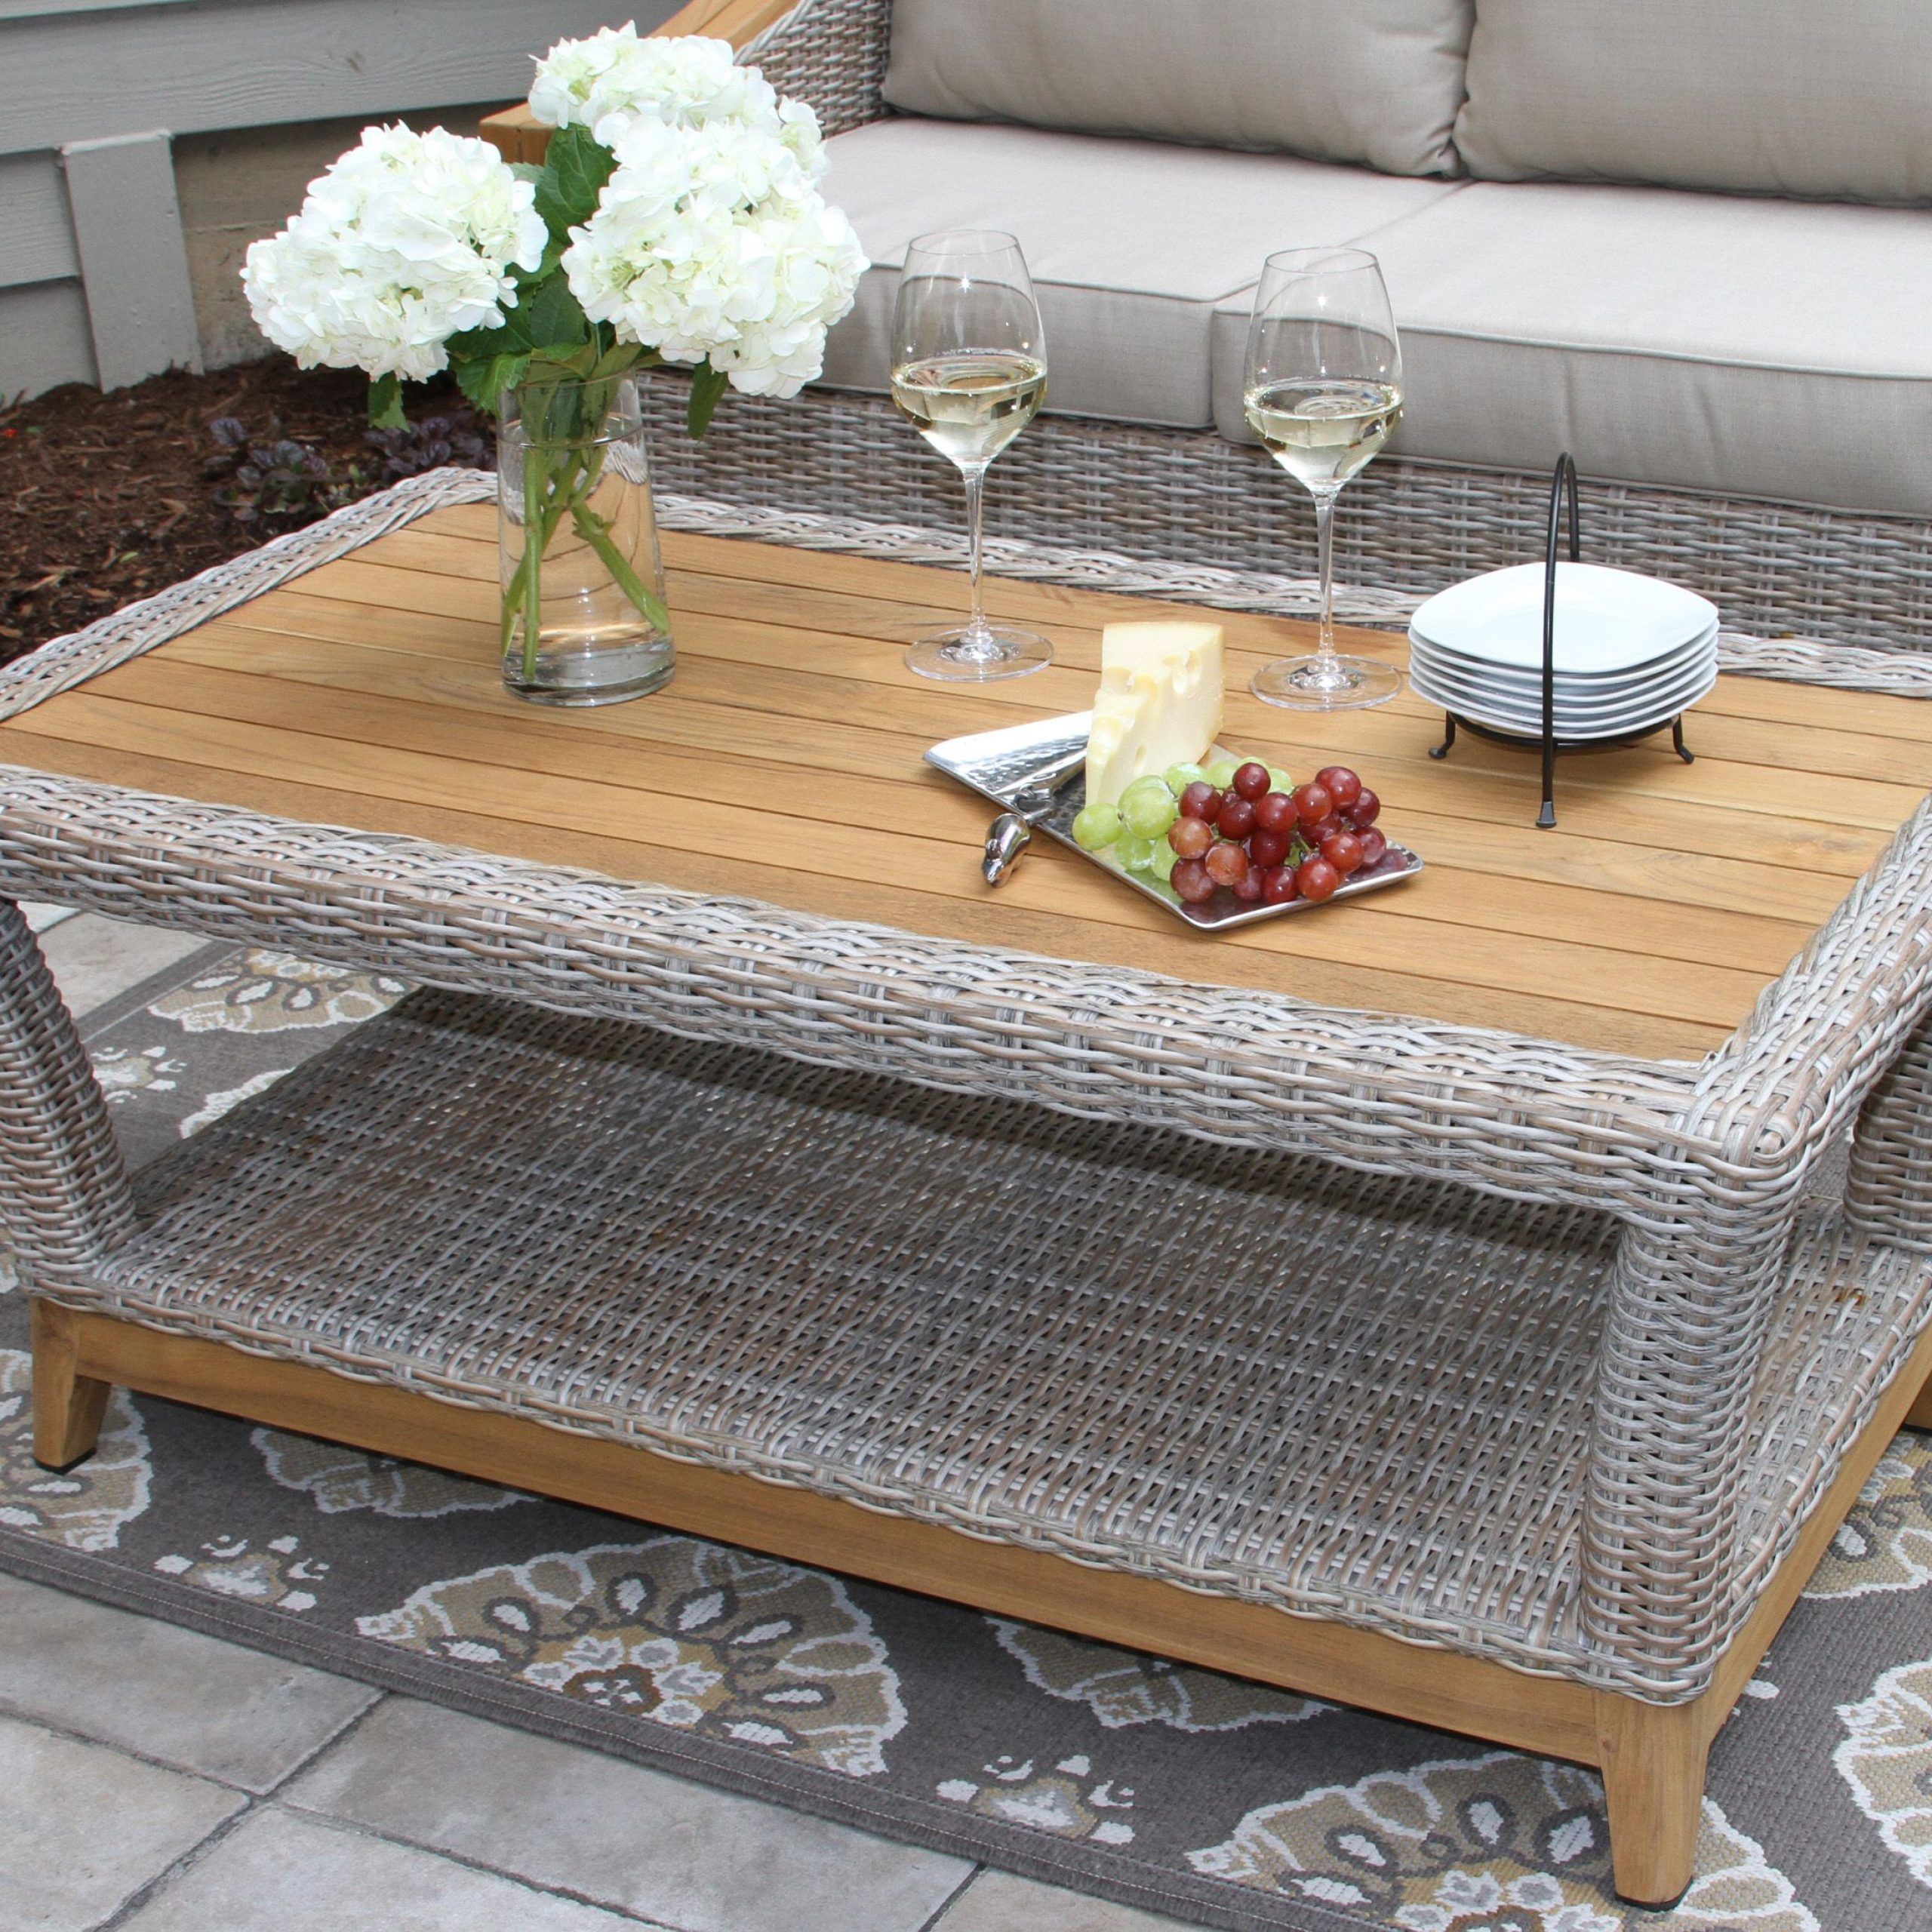 How To Decorate An Outdoor Coffee Table – Coffee Table Decor Throughout Modern Outdoor Patio Coffee Tables (Gallery 9 of 20)